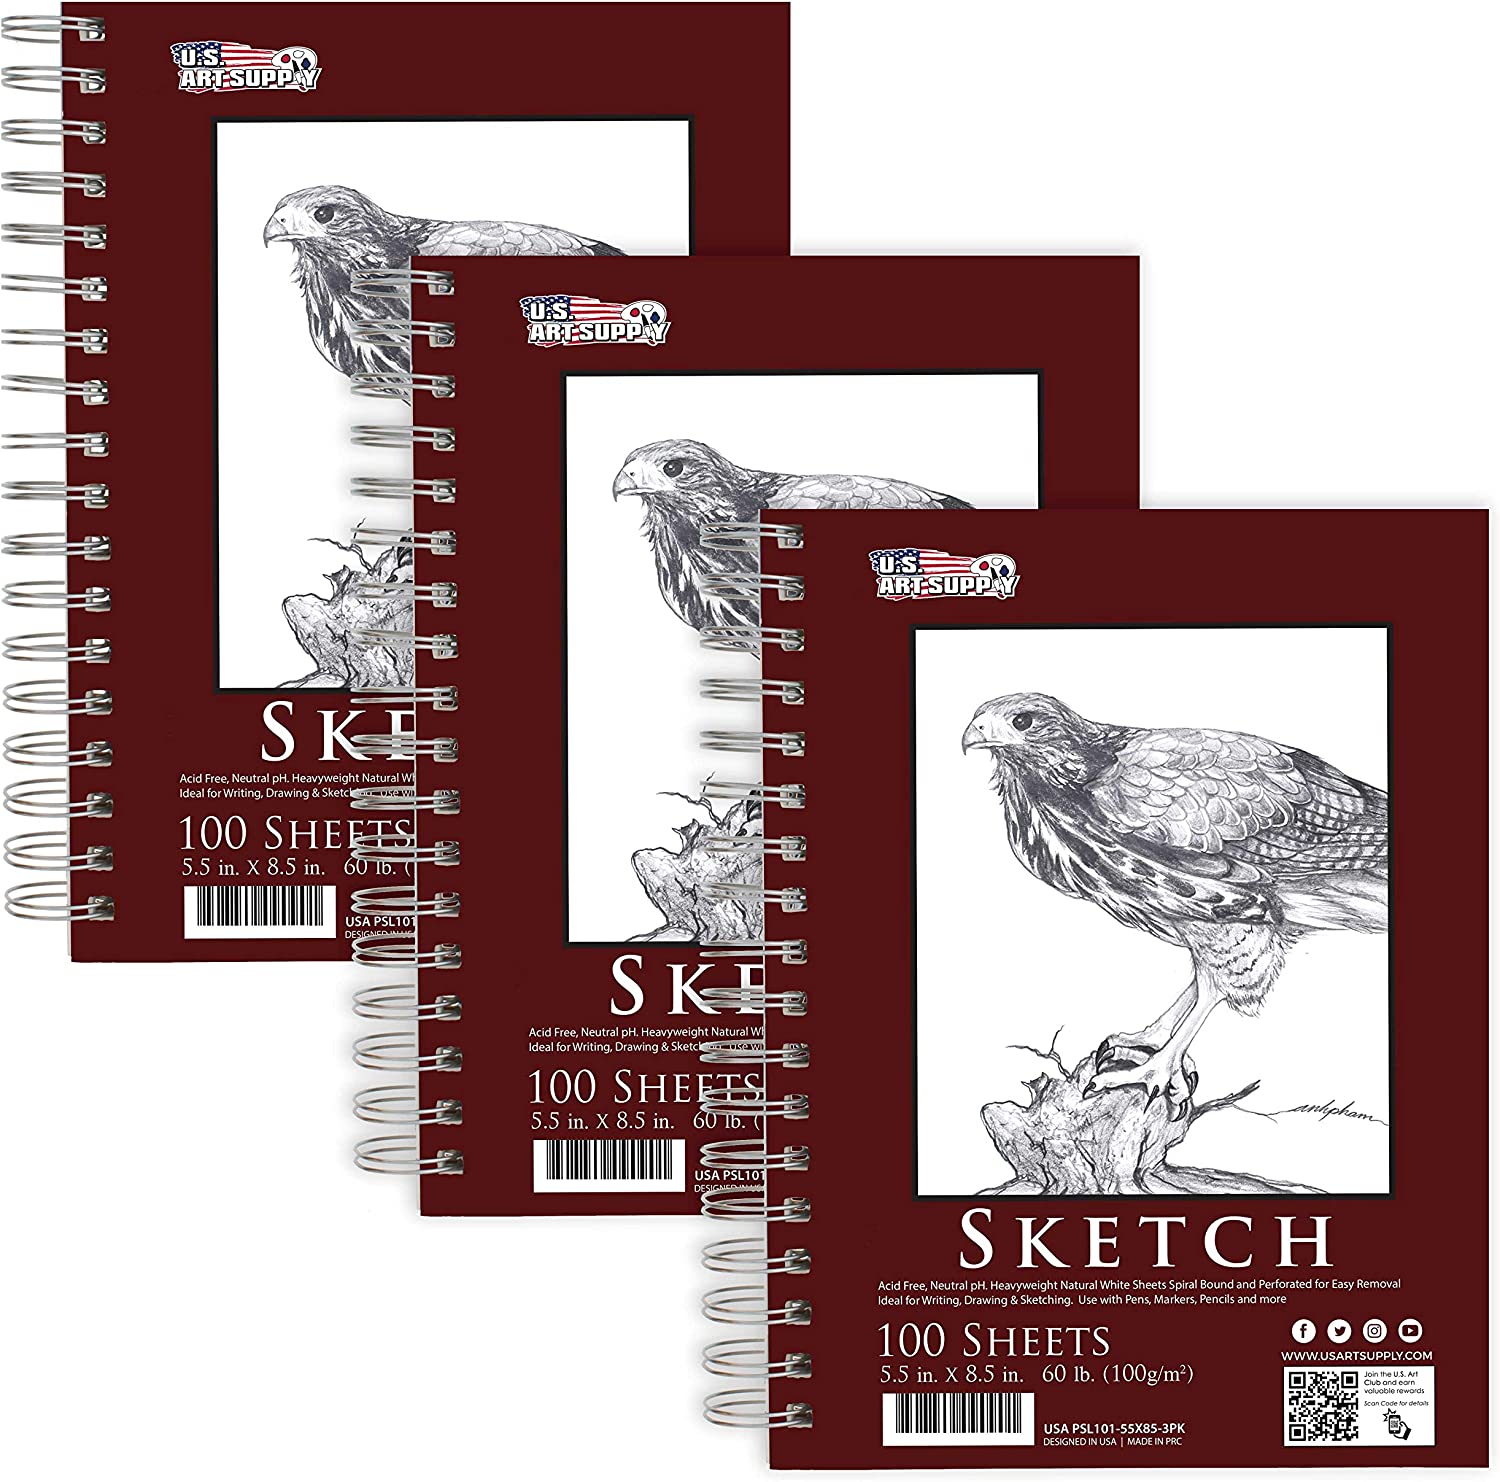 9 x 12 Sketch Book, Top Spiral Bound Sketch Pad, 100-Sheets (50lb), Acid  Free Art Sketchbook Artistic Drawing Painting Writing Paper for Kids Adults  Beginners Artists 